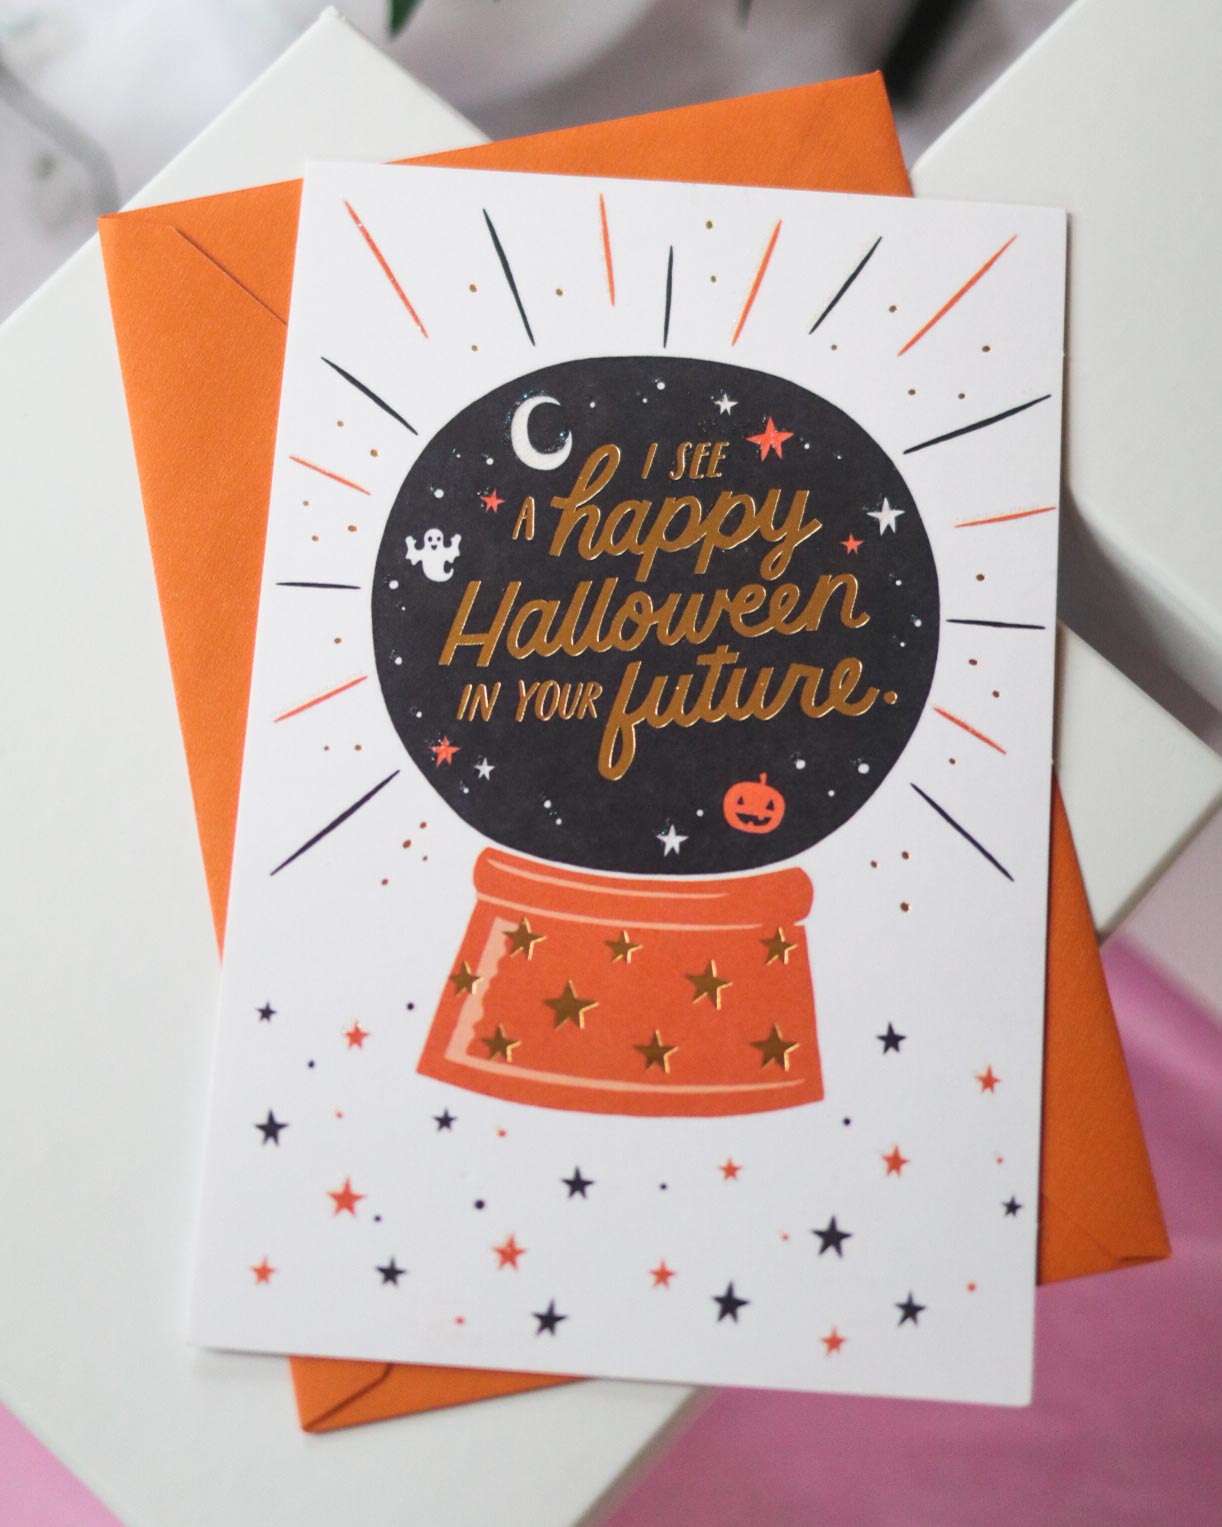 Halloween greeting cards - just to make you smile